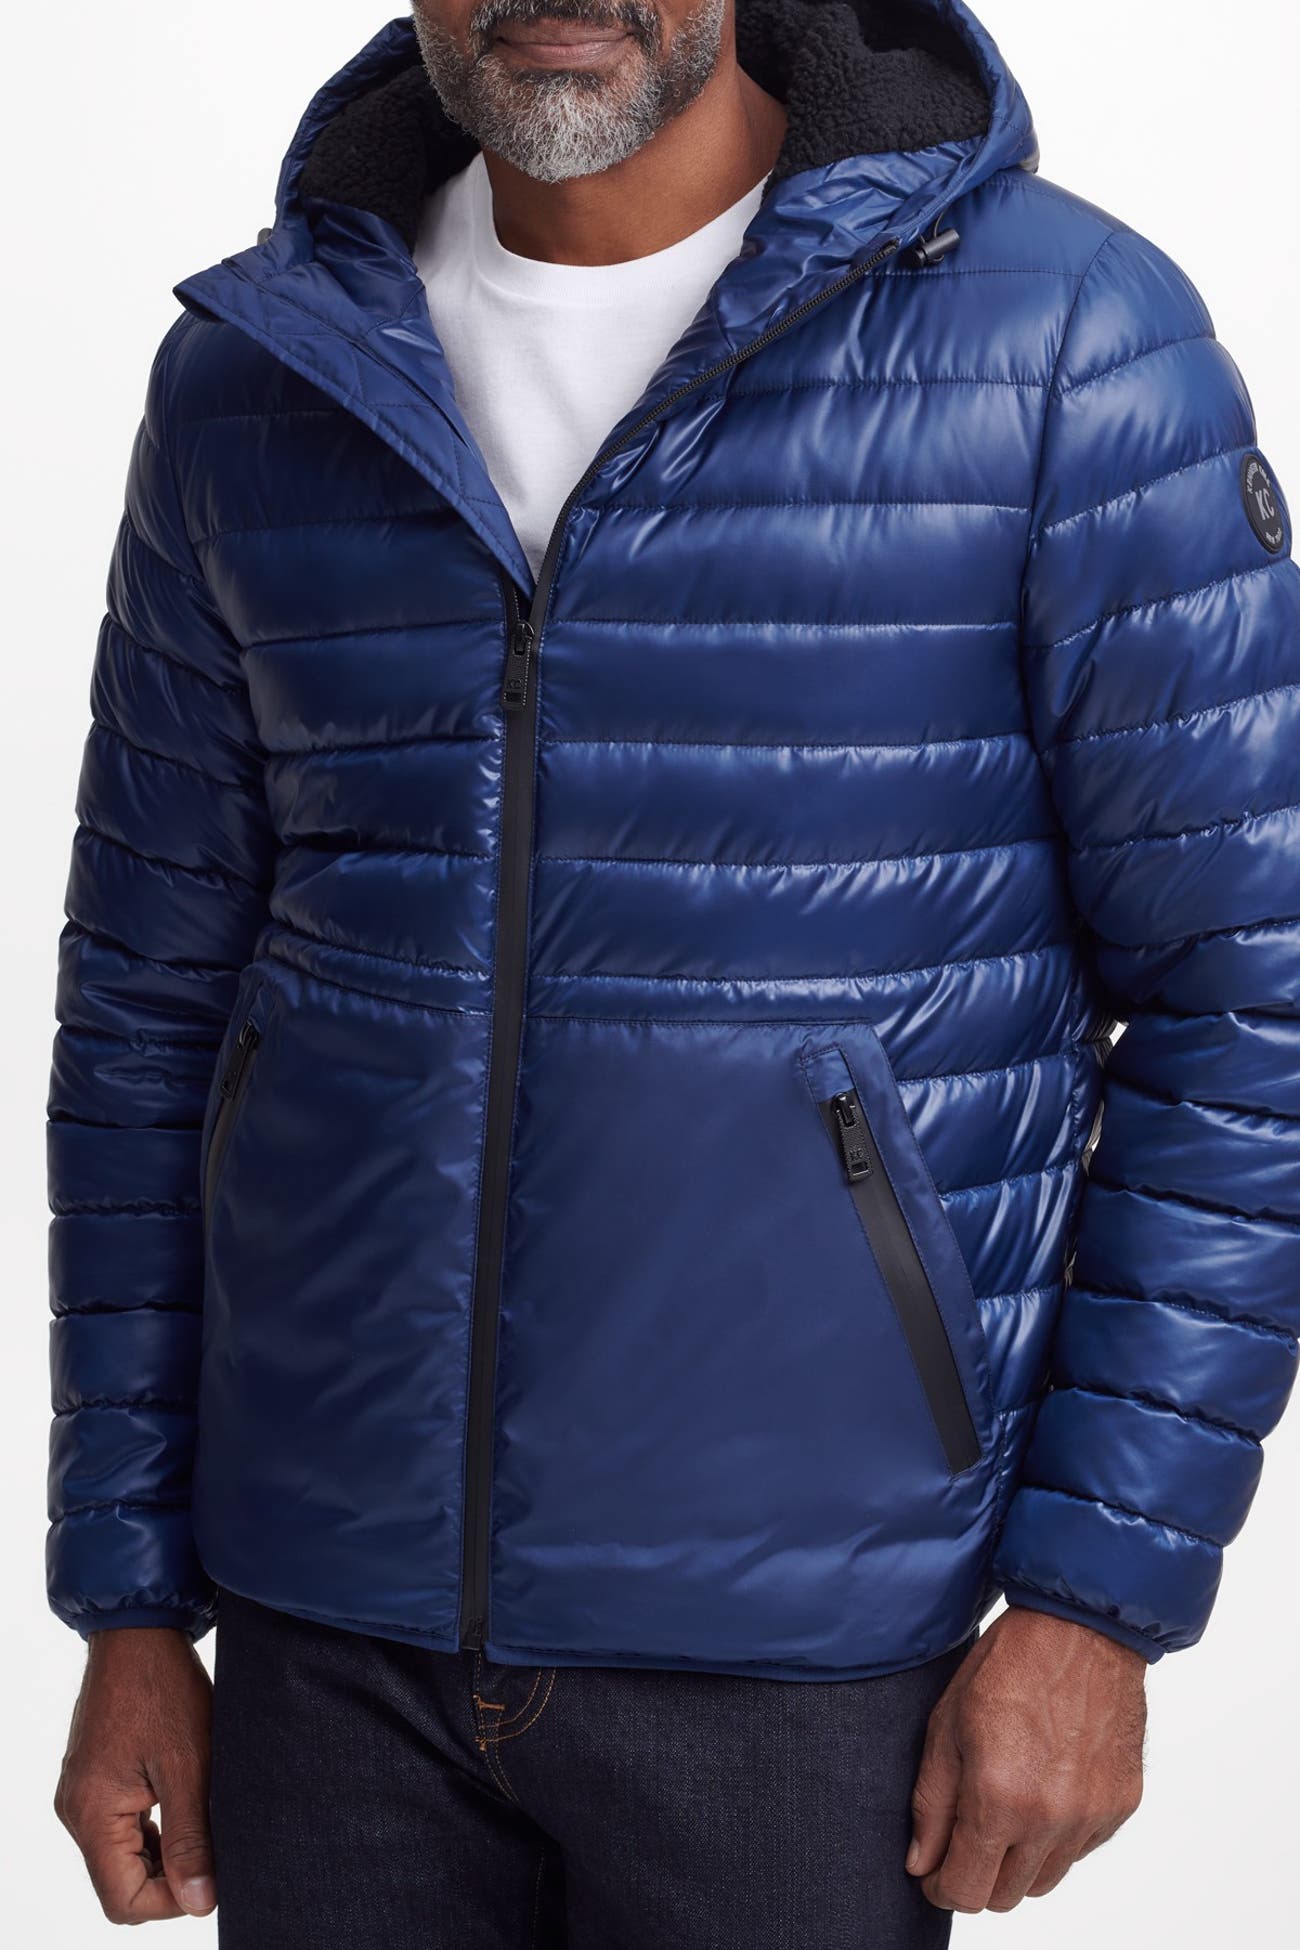 KENNETH COLE | Hooded Midweight Quilted Zip Jacket | Nordstrom Rack